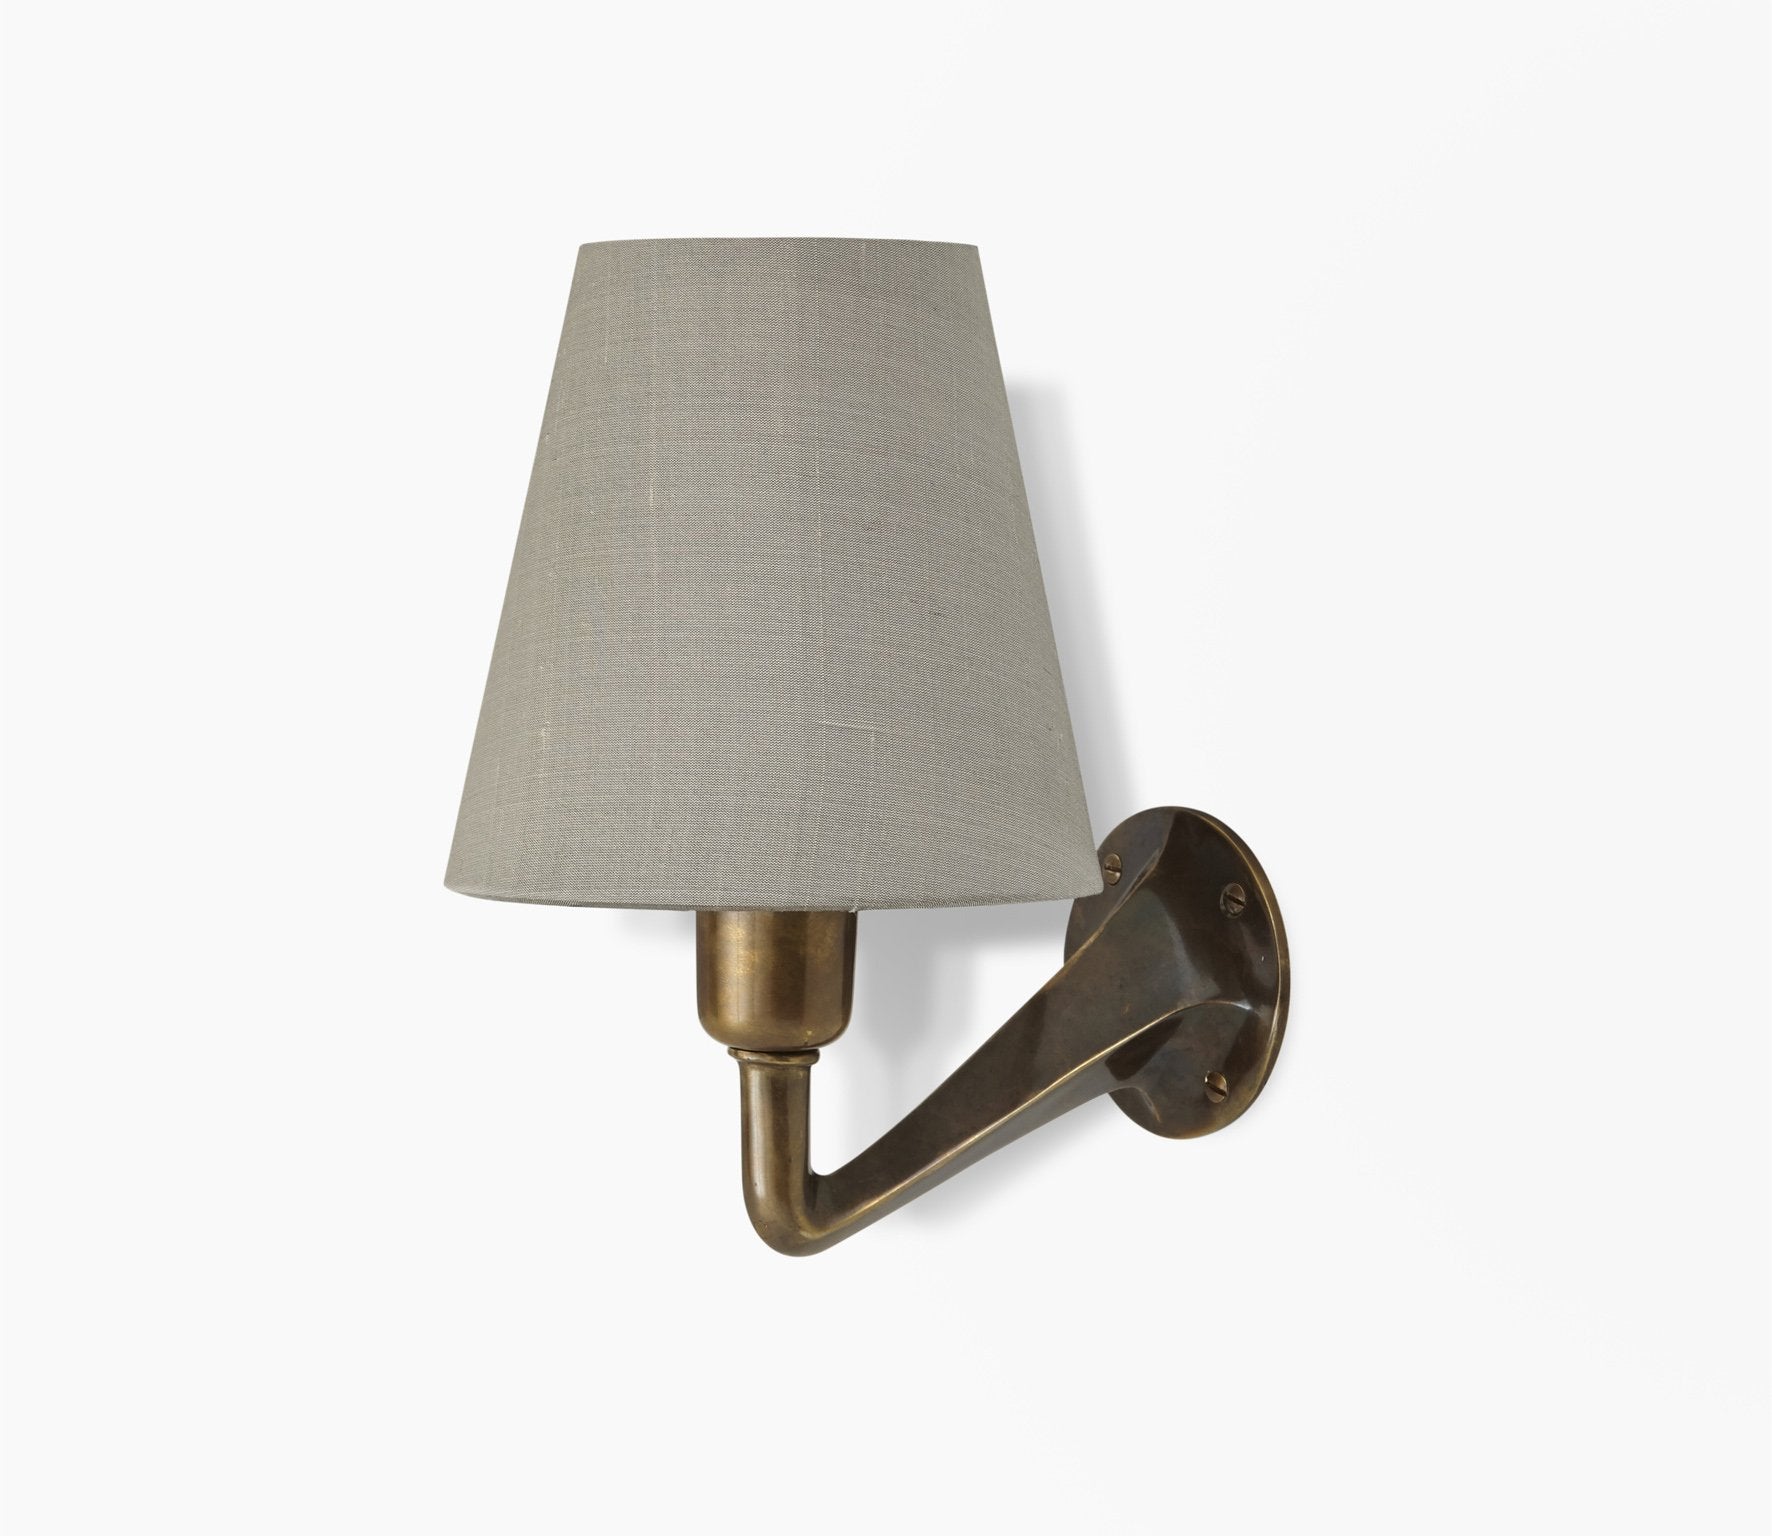 Leila Wall Light with Plain Empire Shade Product Image 1